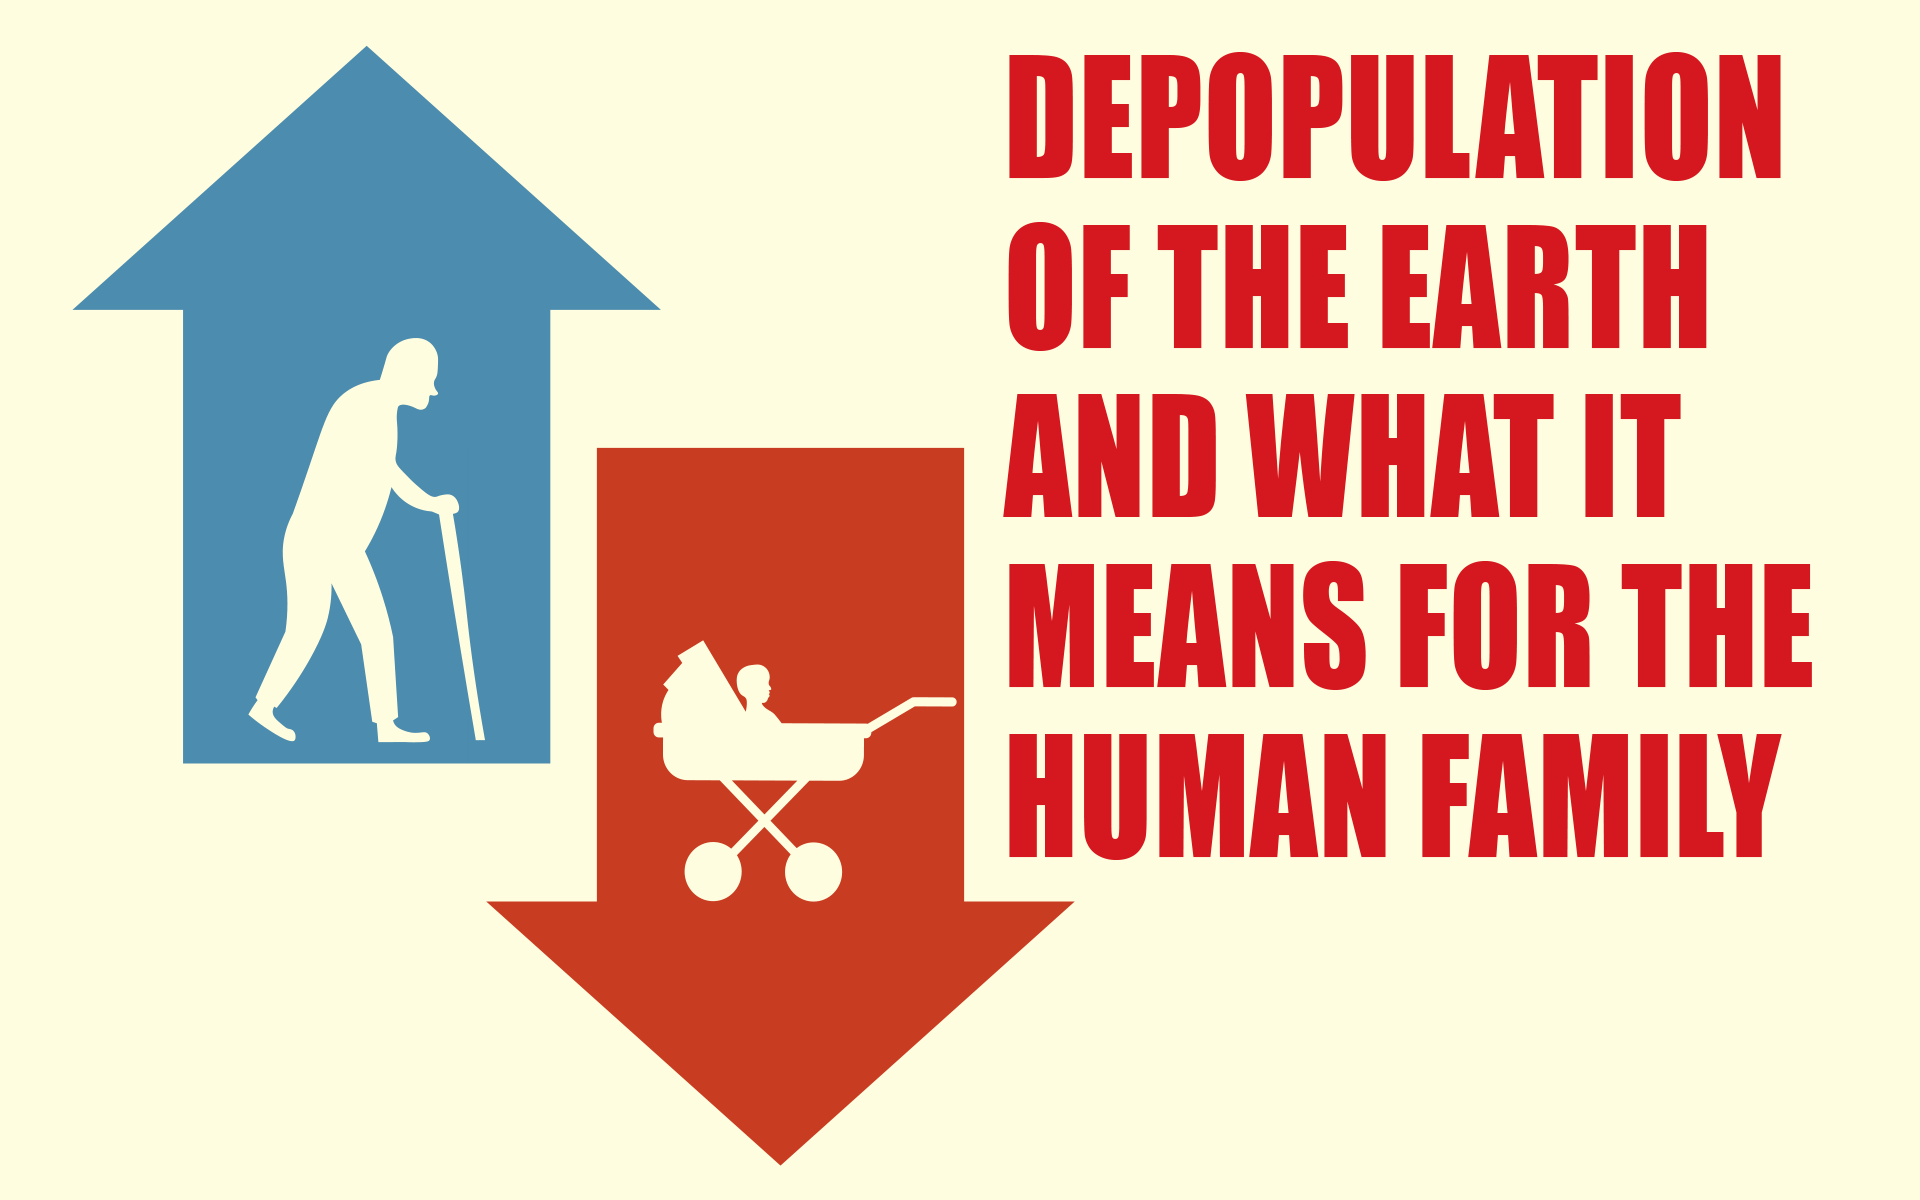 Depopulation of the Earth and What it Means for the Human Family